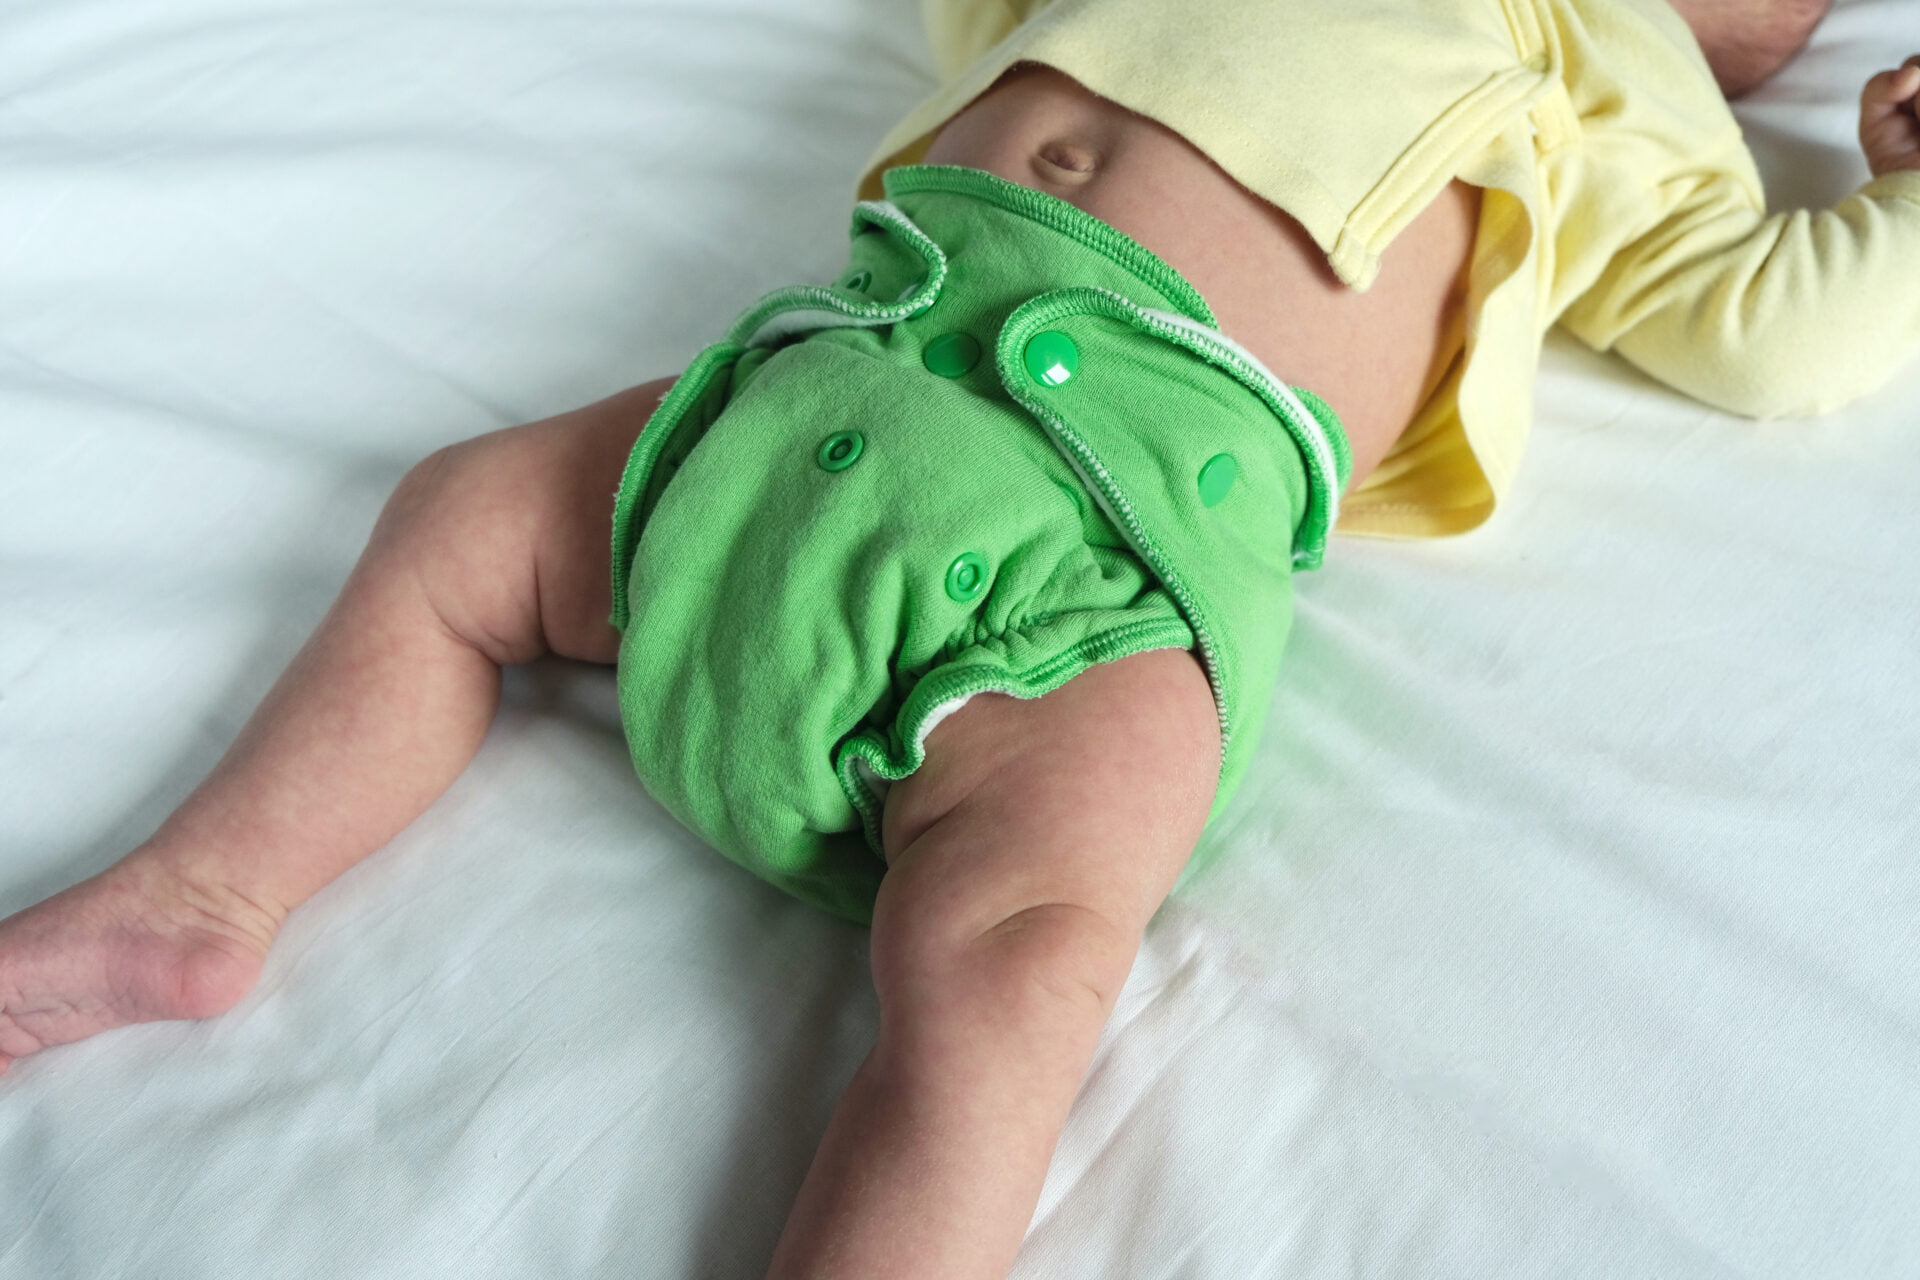 Newborn baby in green reusable diaper on a white sheet. Modern eco friendly cloth nappy for infant child hygiene. Sustainable lifestyle, zero waste concept.